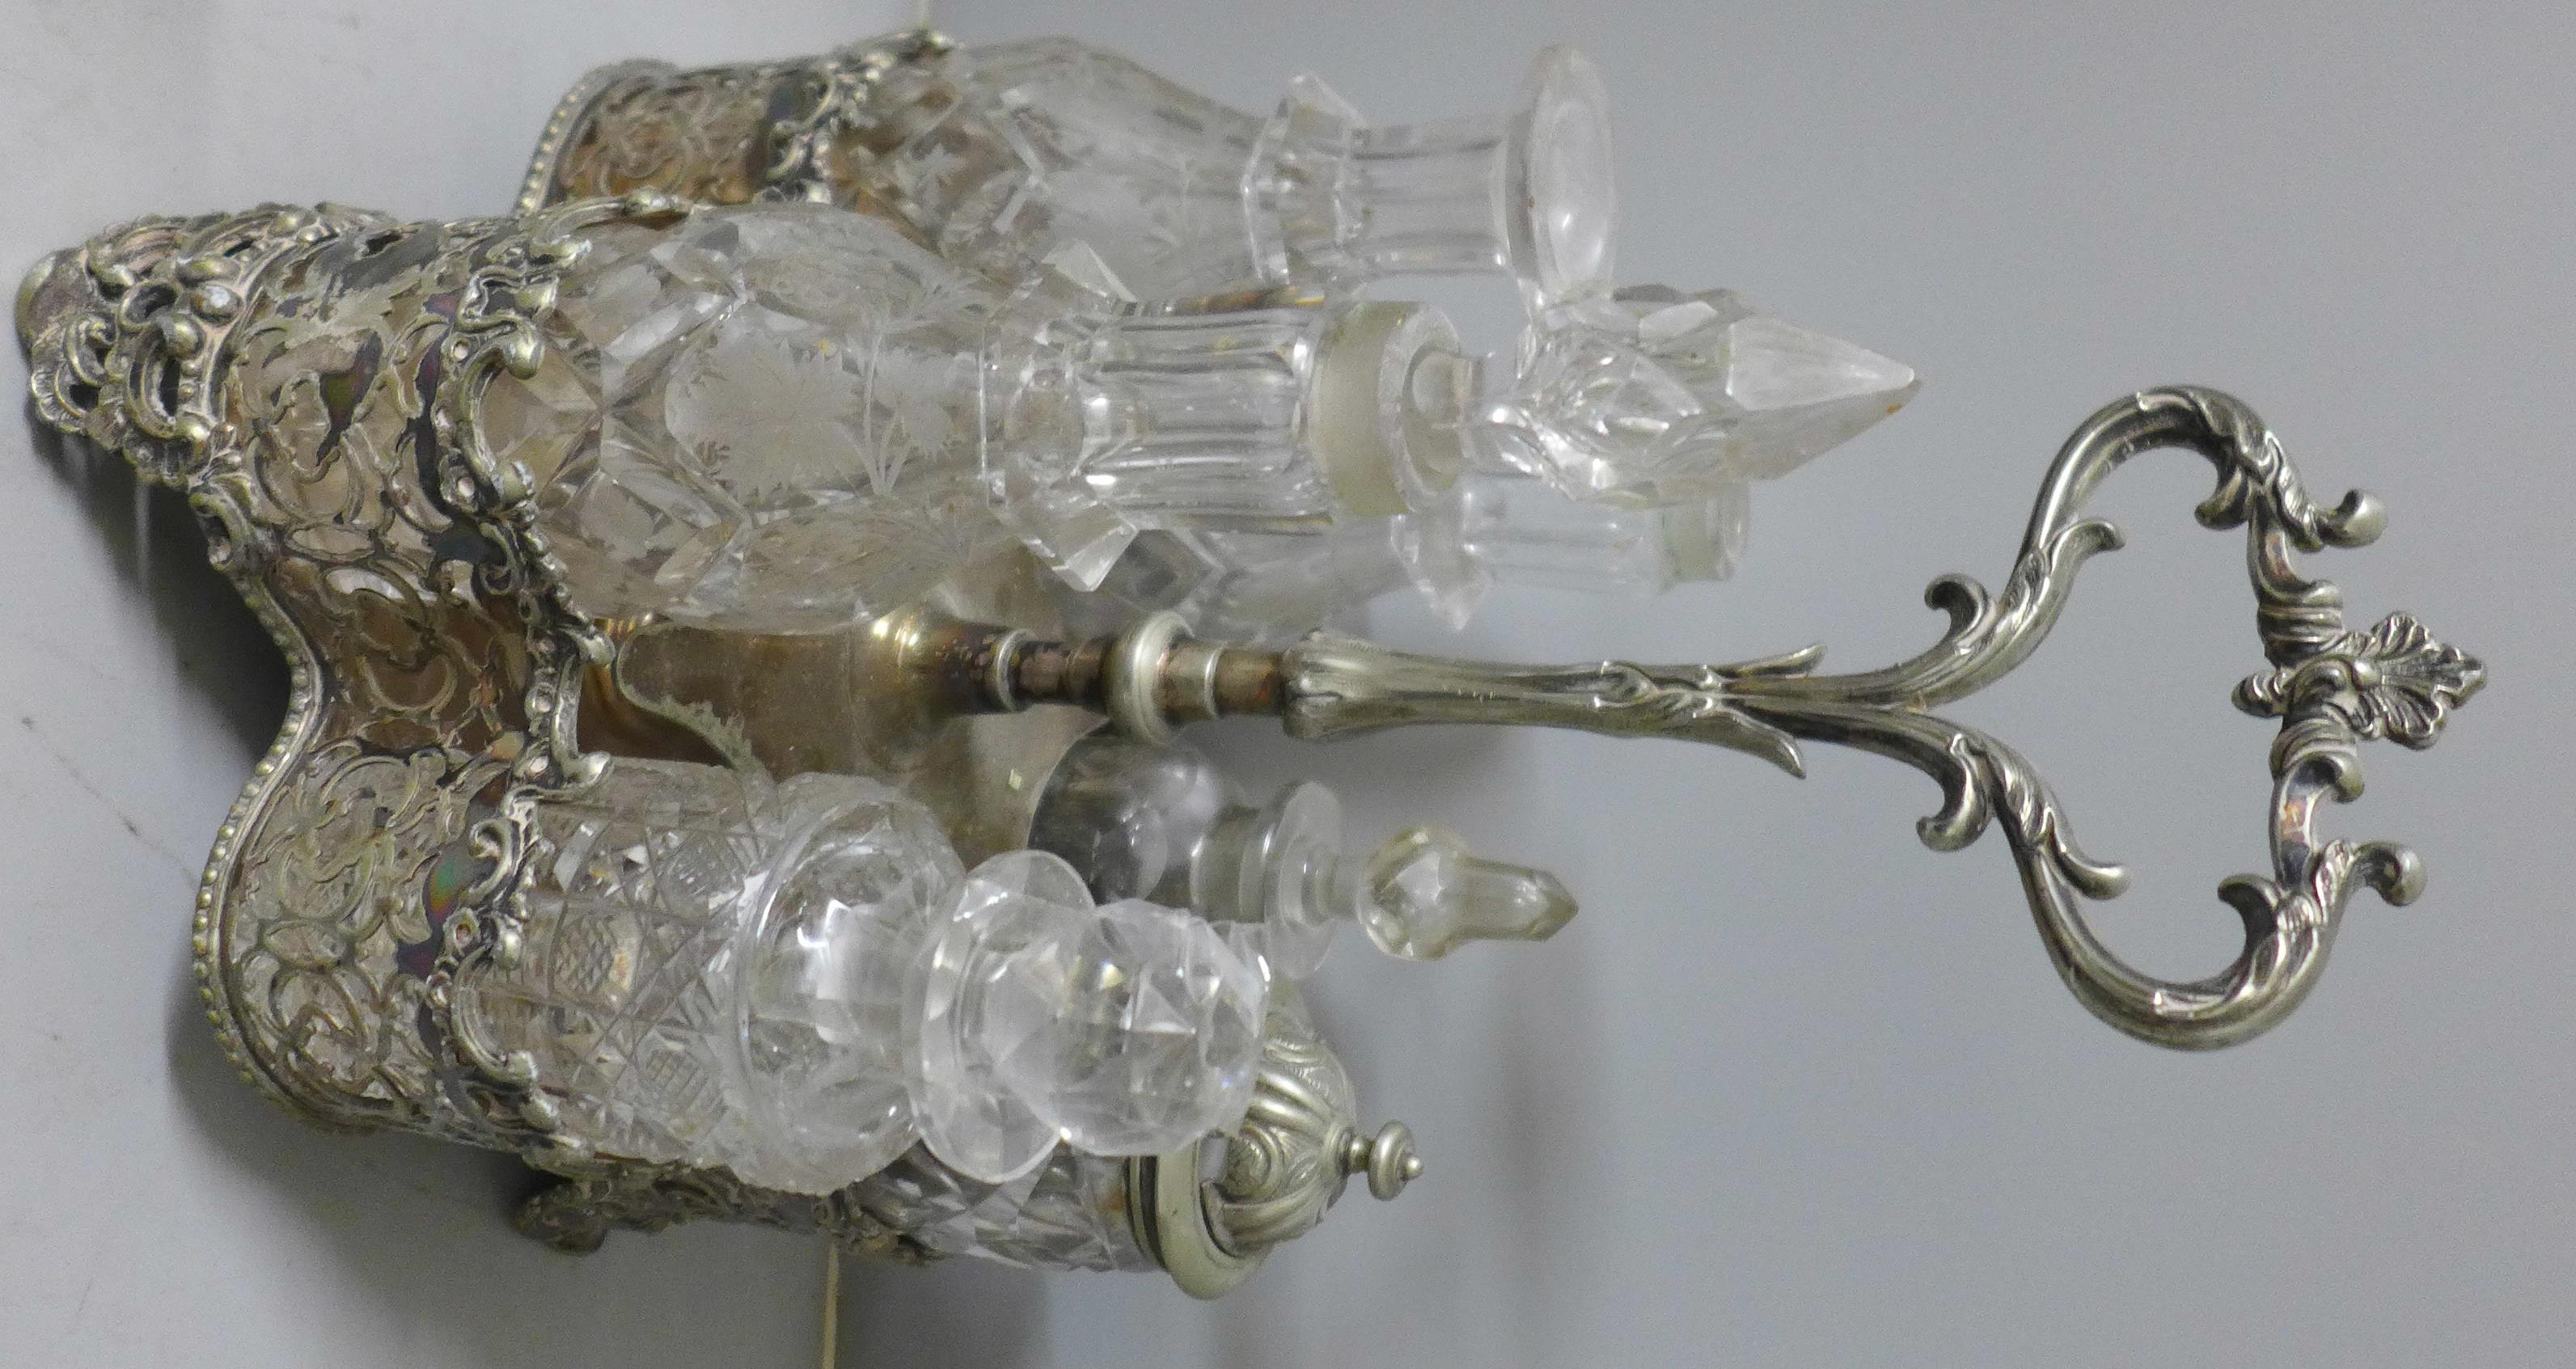 Two plated cruet sets, one six bottle with missing glass bottle and an ornate six bottle cruet set - Image 3 of 3